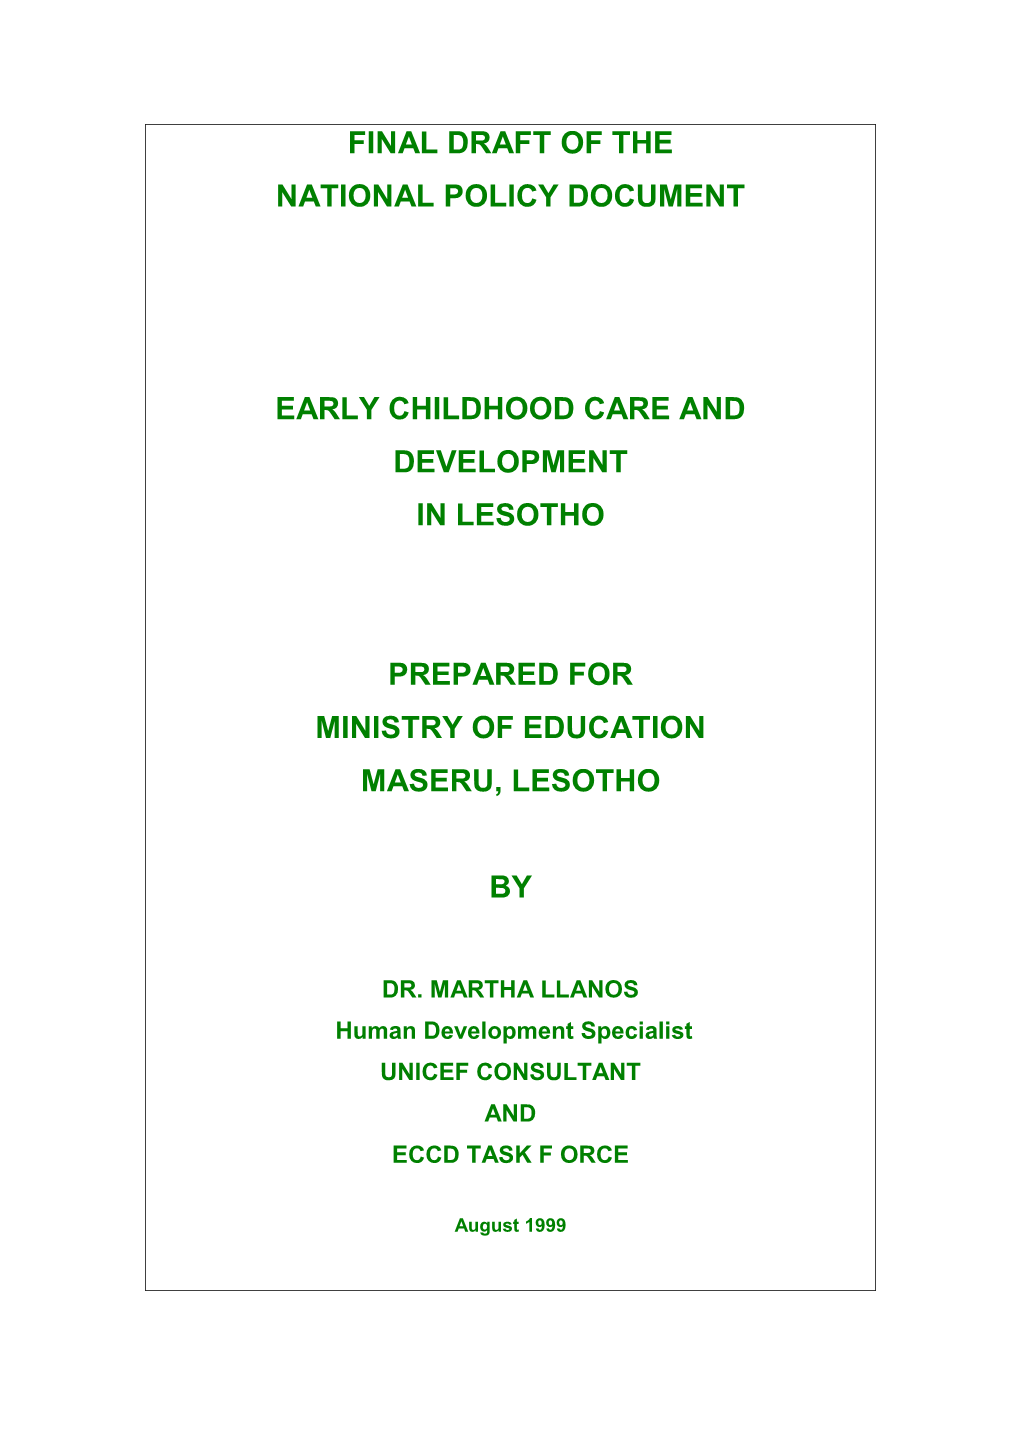 Lesotho Early Childhood Care and Development Policy